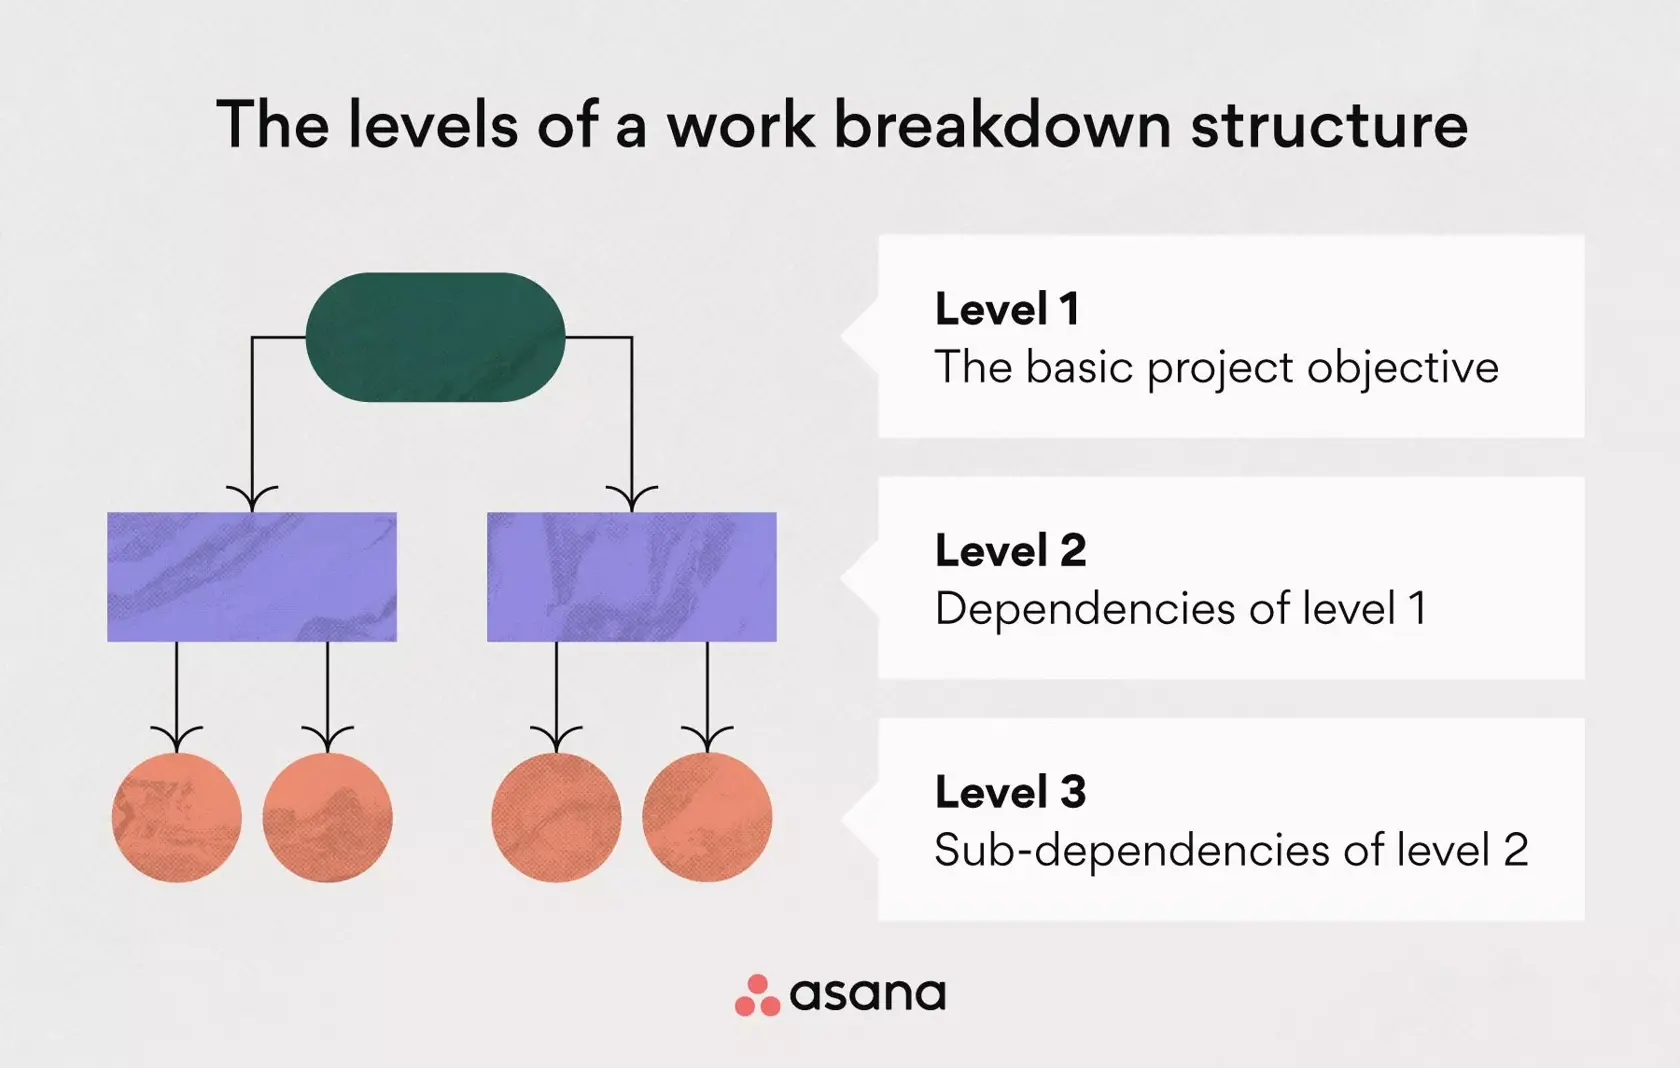 Levels of a work breakdown structure